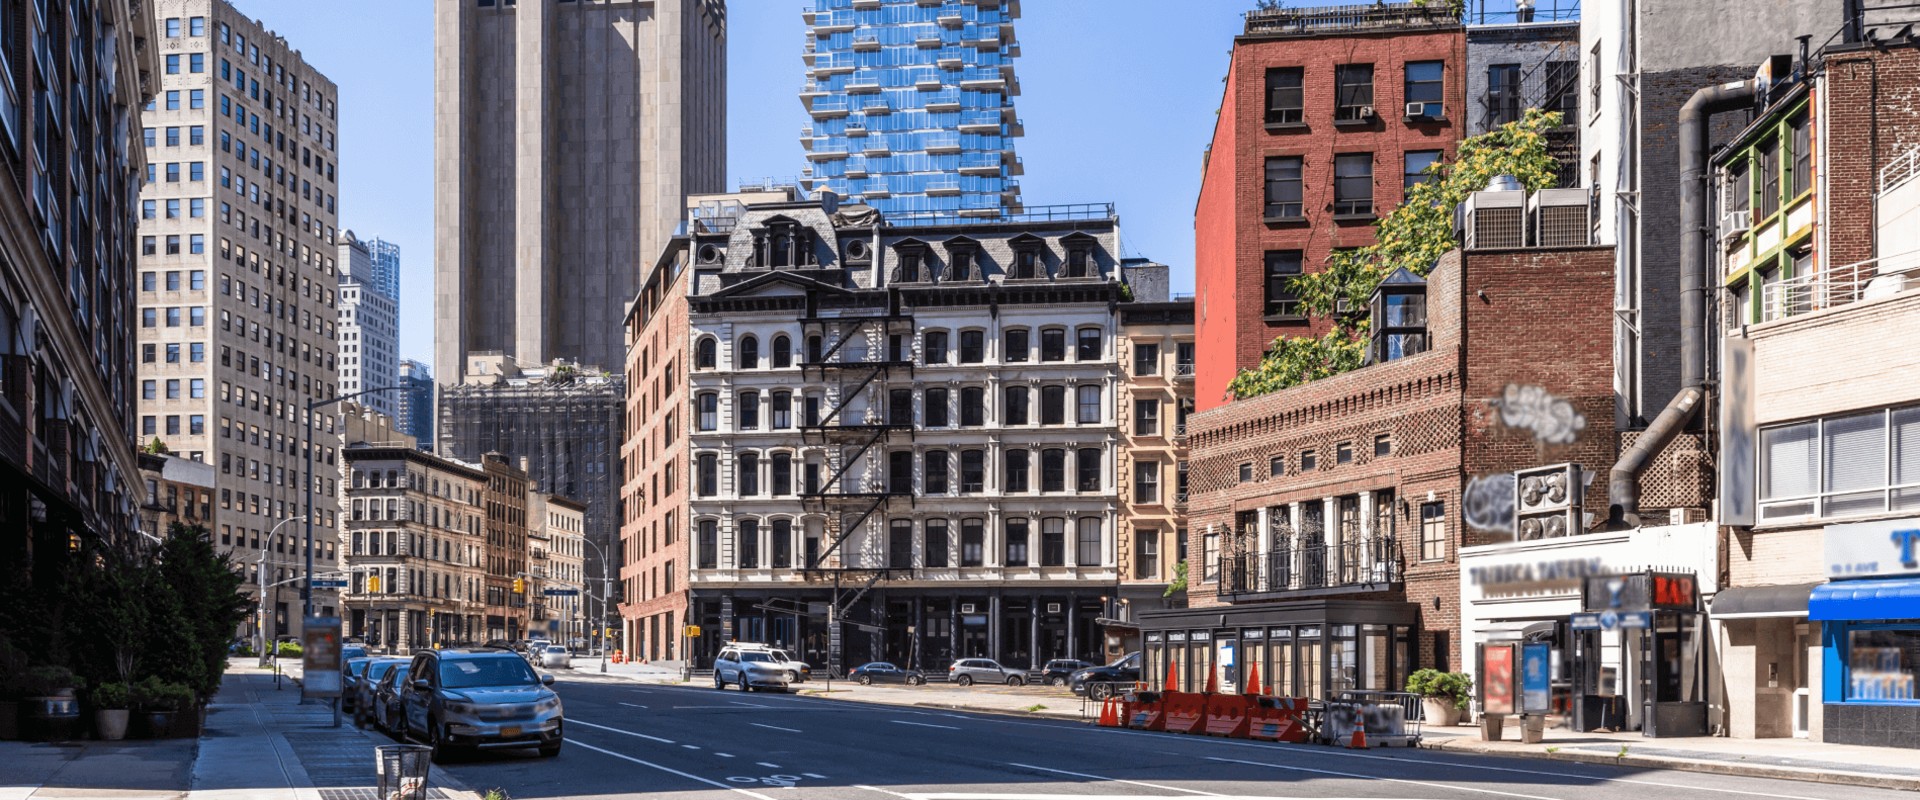 Up-and-coming Neighborhoods to Watch in the New York Housing Market